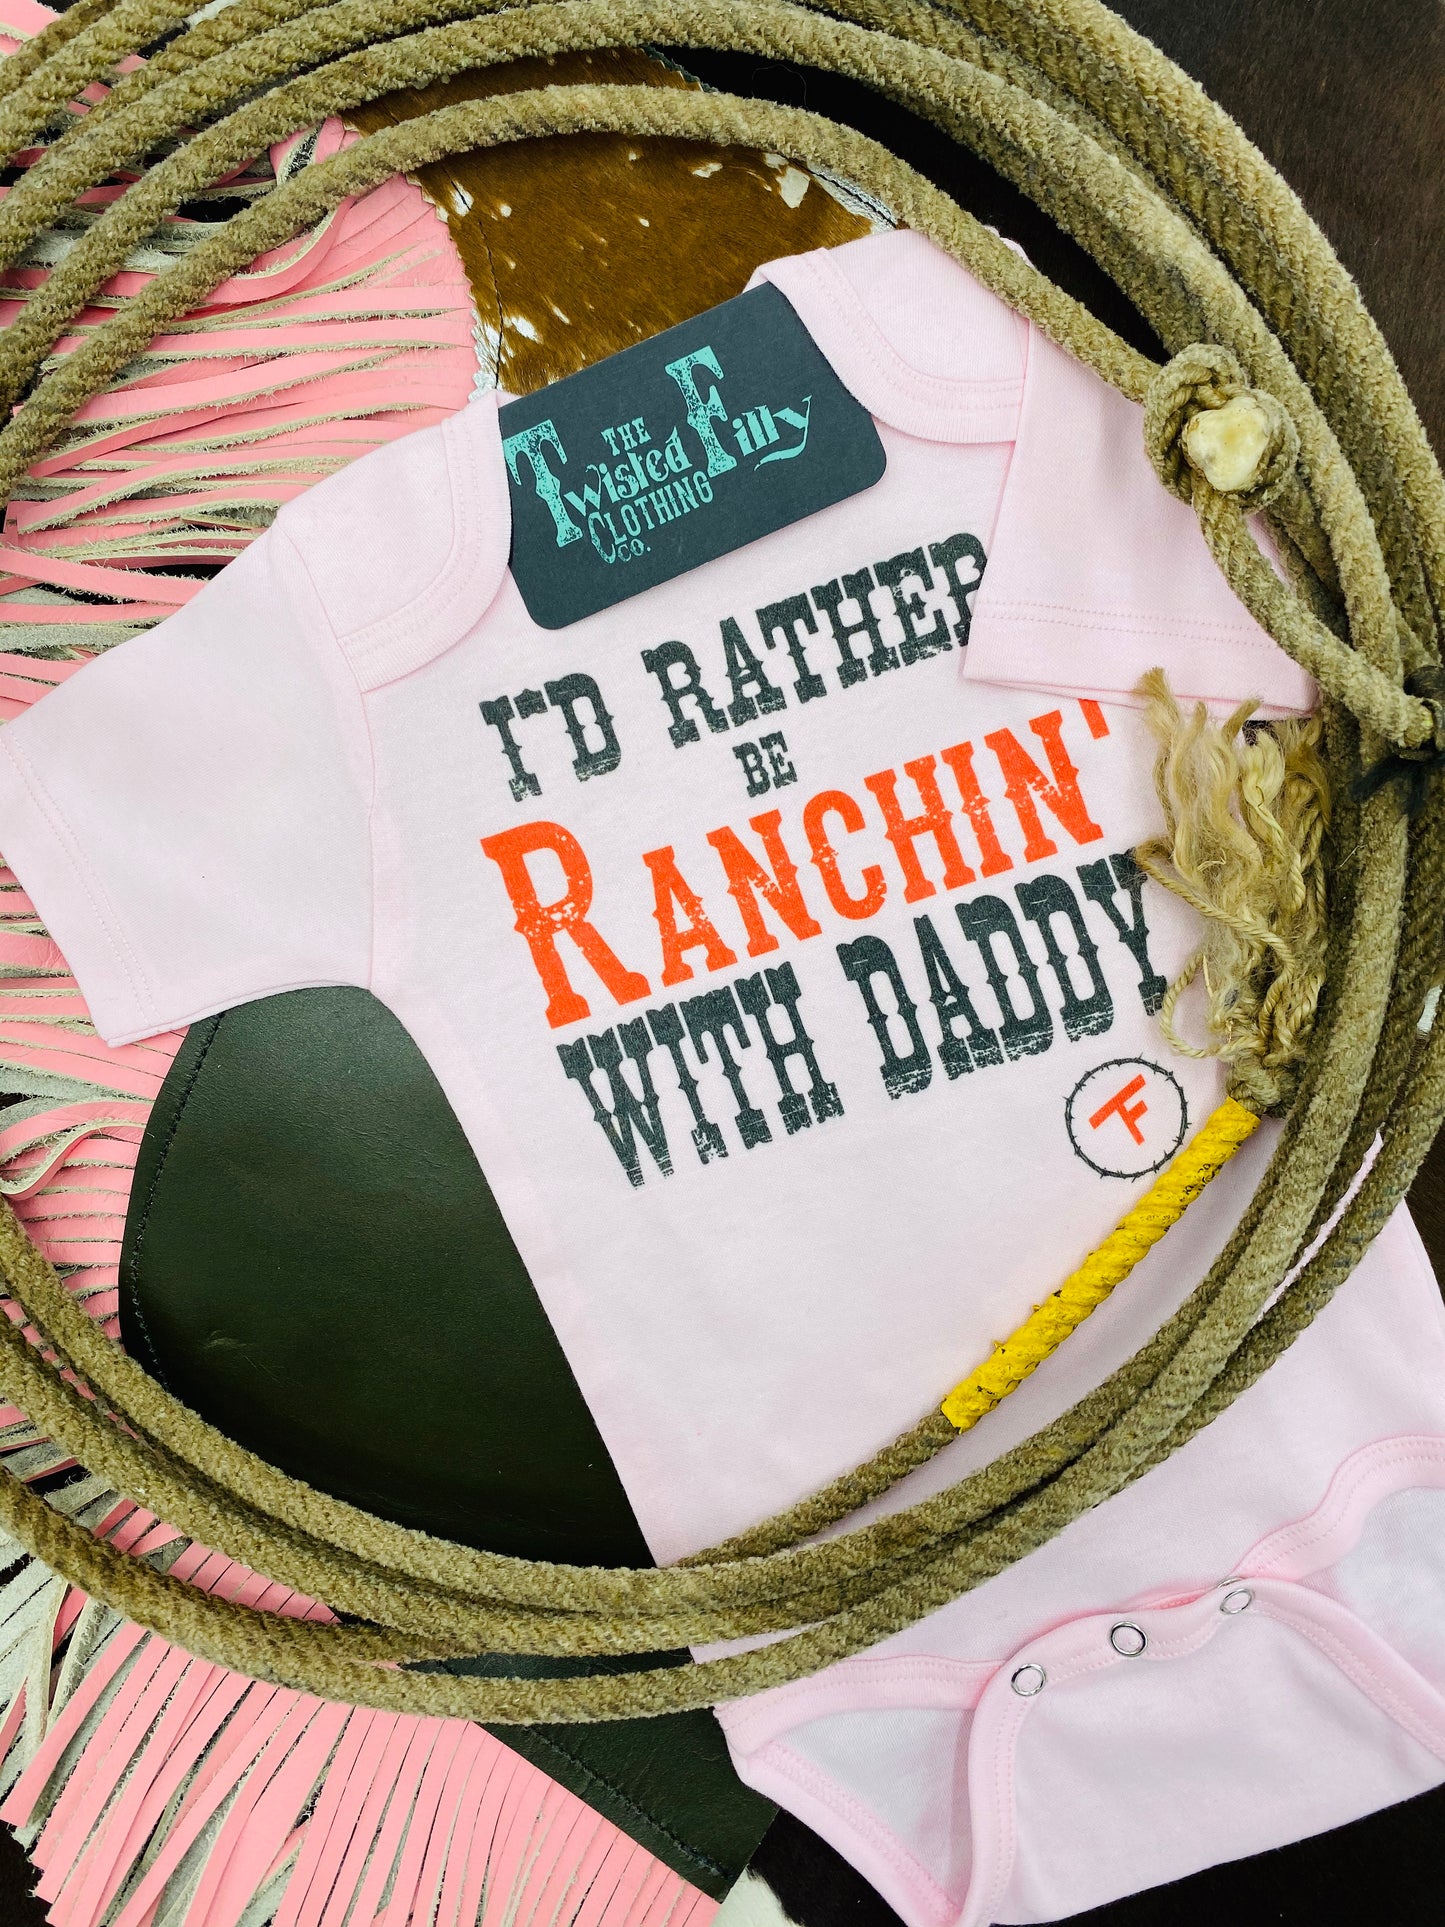 I'd Rather Be Ranchin' W/ Daddy - S/S Infant One Piece - Pink